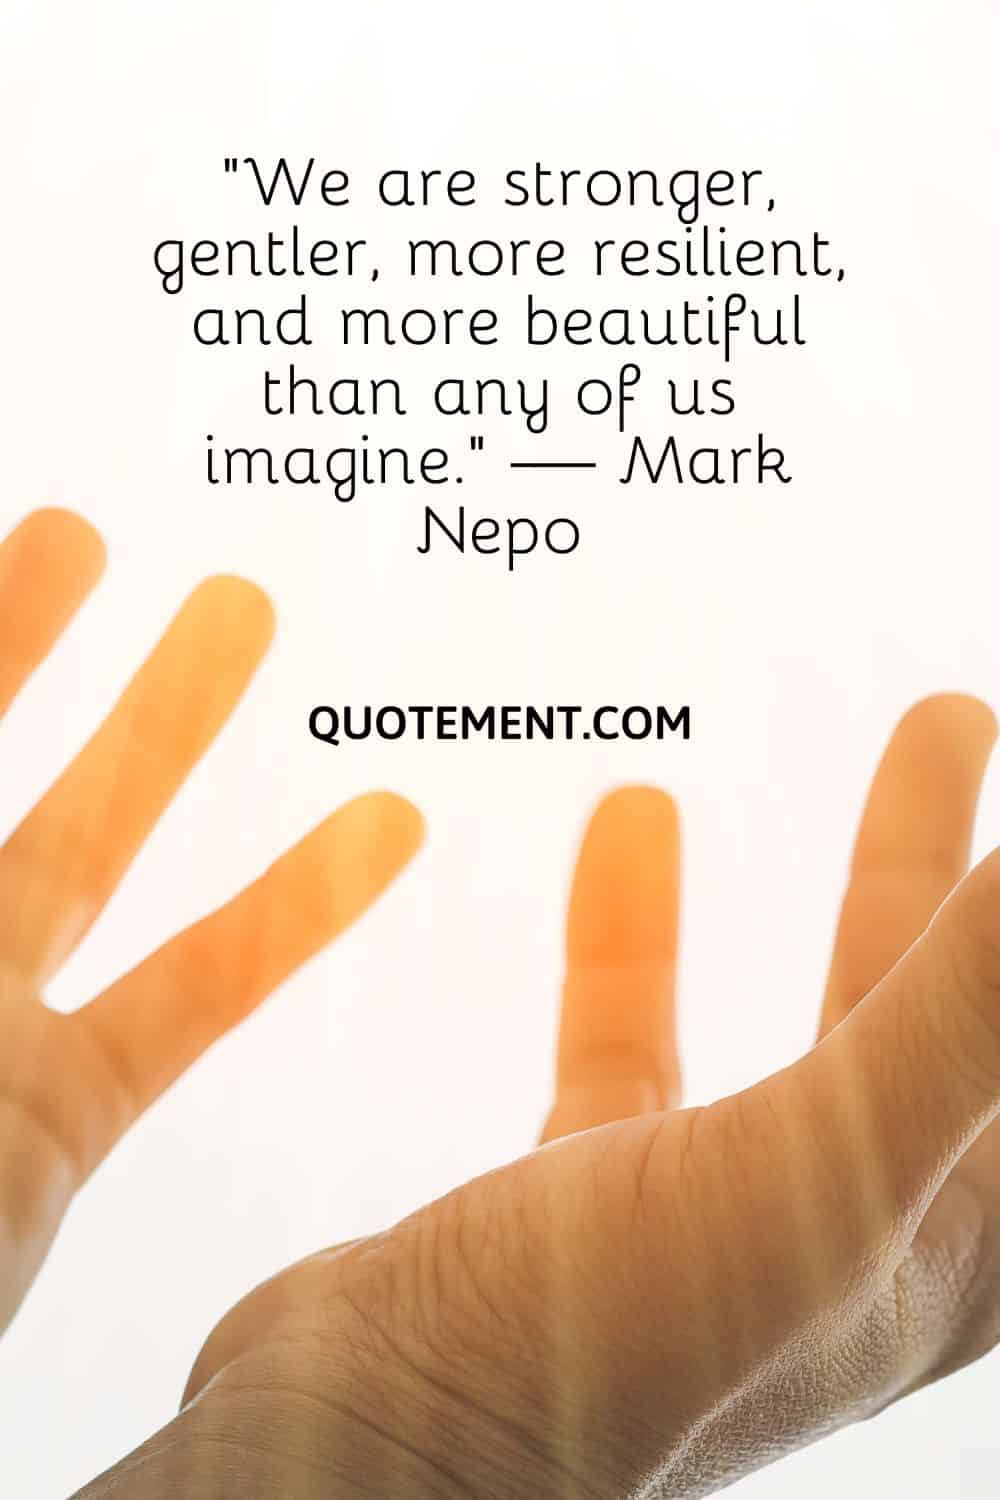 “We are stronger, gentler, more resilient, and more beautiful than any of us imagine.” — Mark Nepo